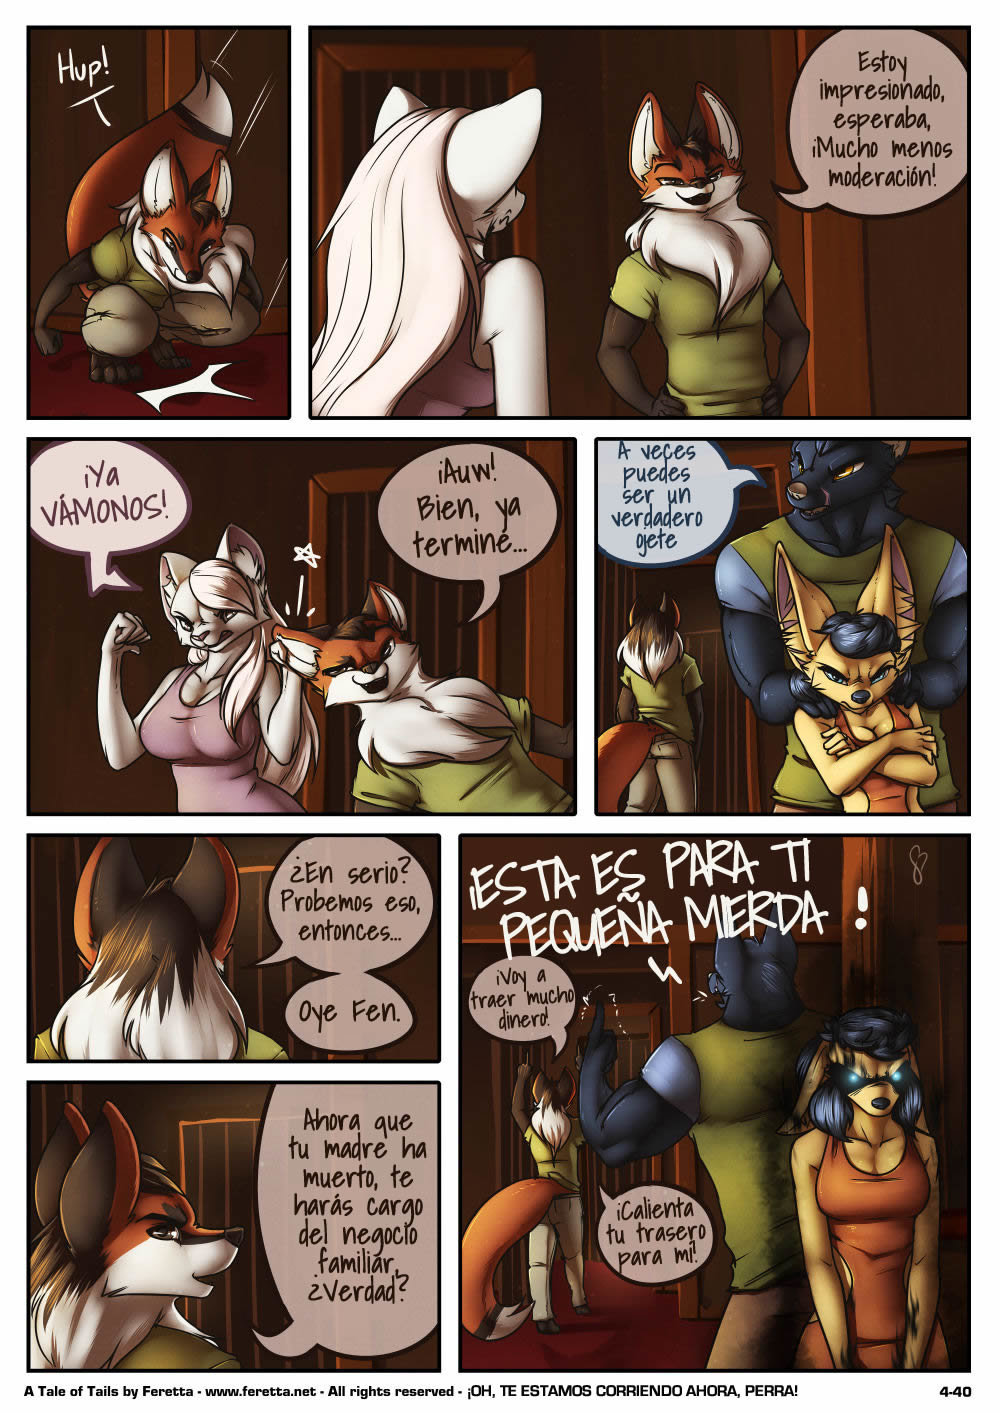 A Tale of Tails 4 - 39